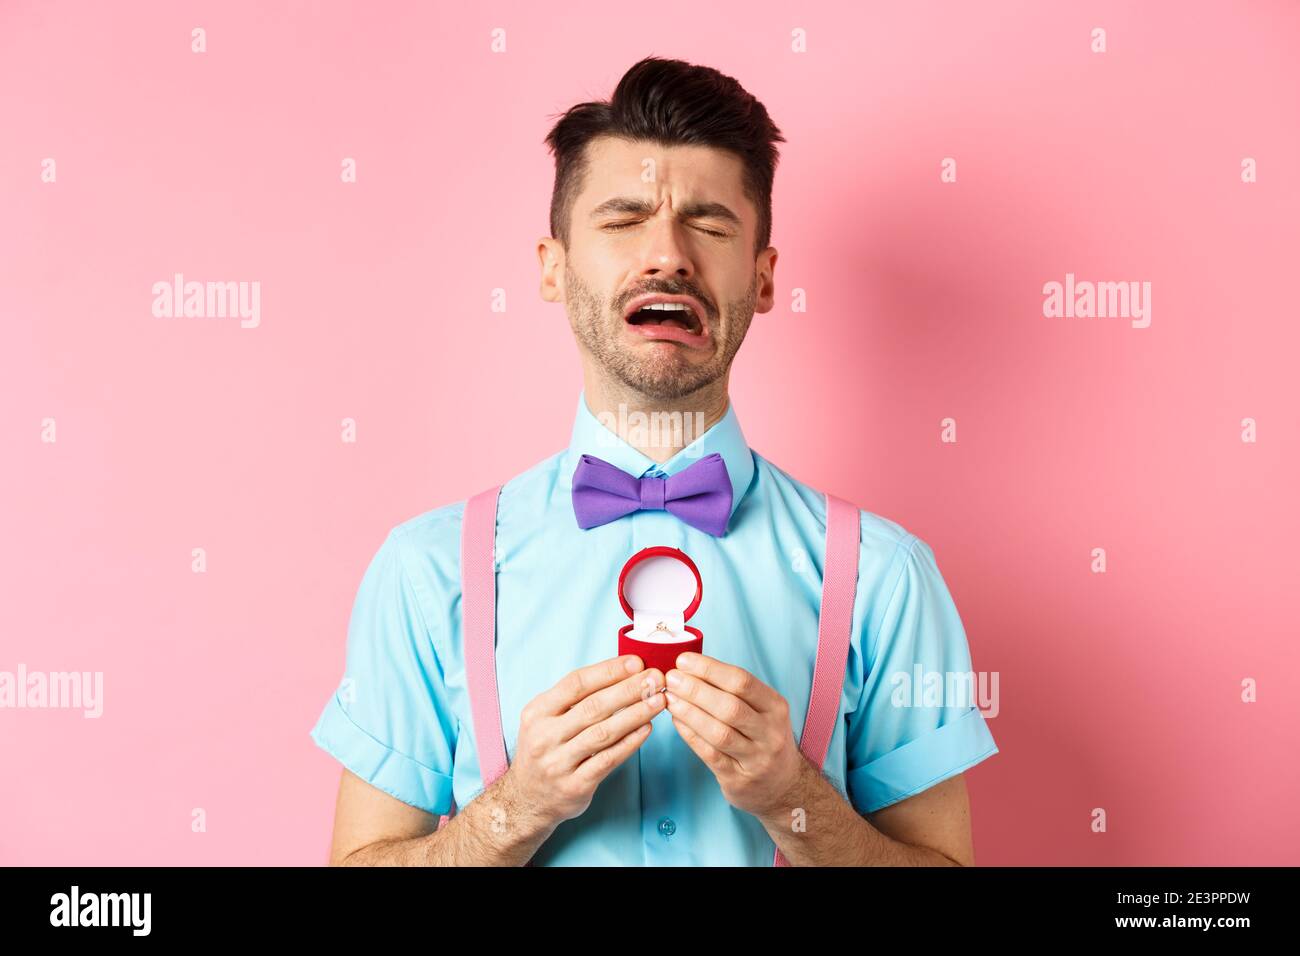 Valentines day. Heartbroken guy crying and holding engagement ring, sobbing from break-up, standing over pink background Stock Photo